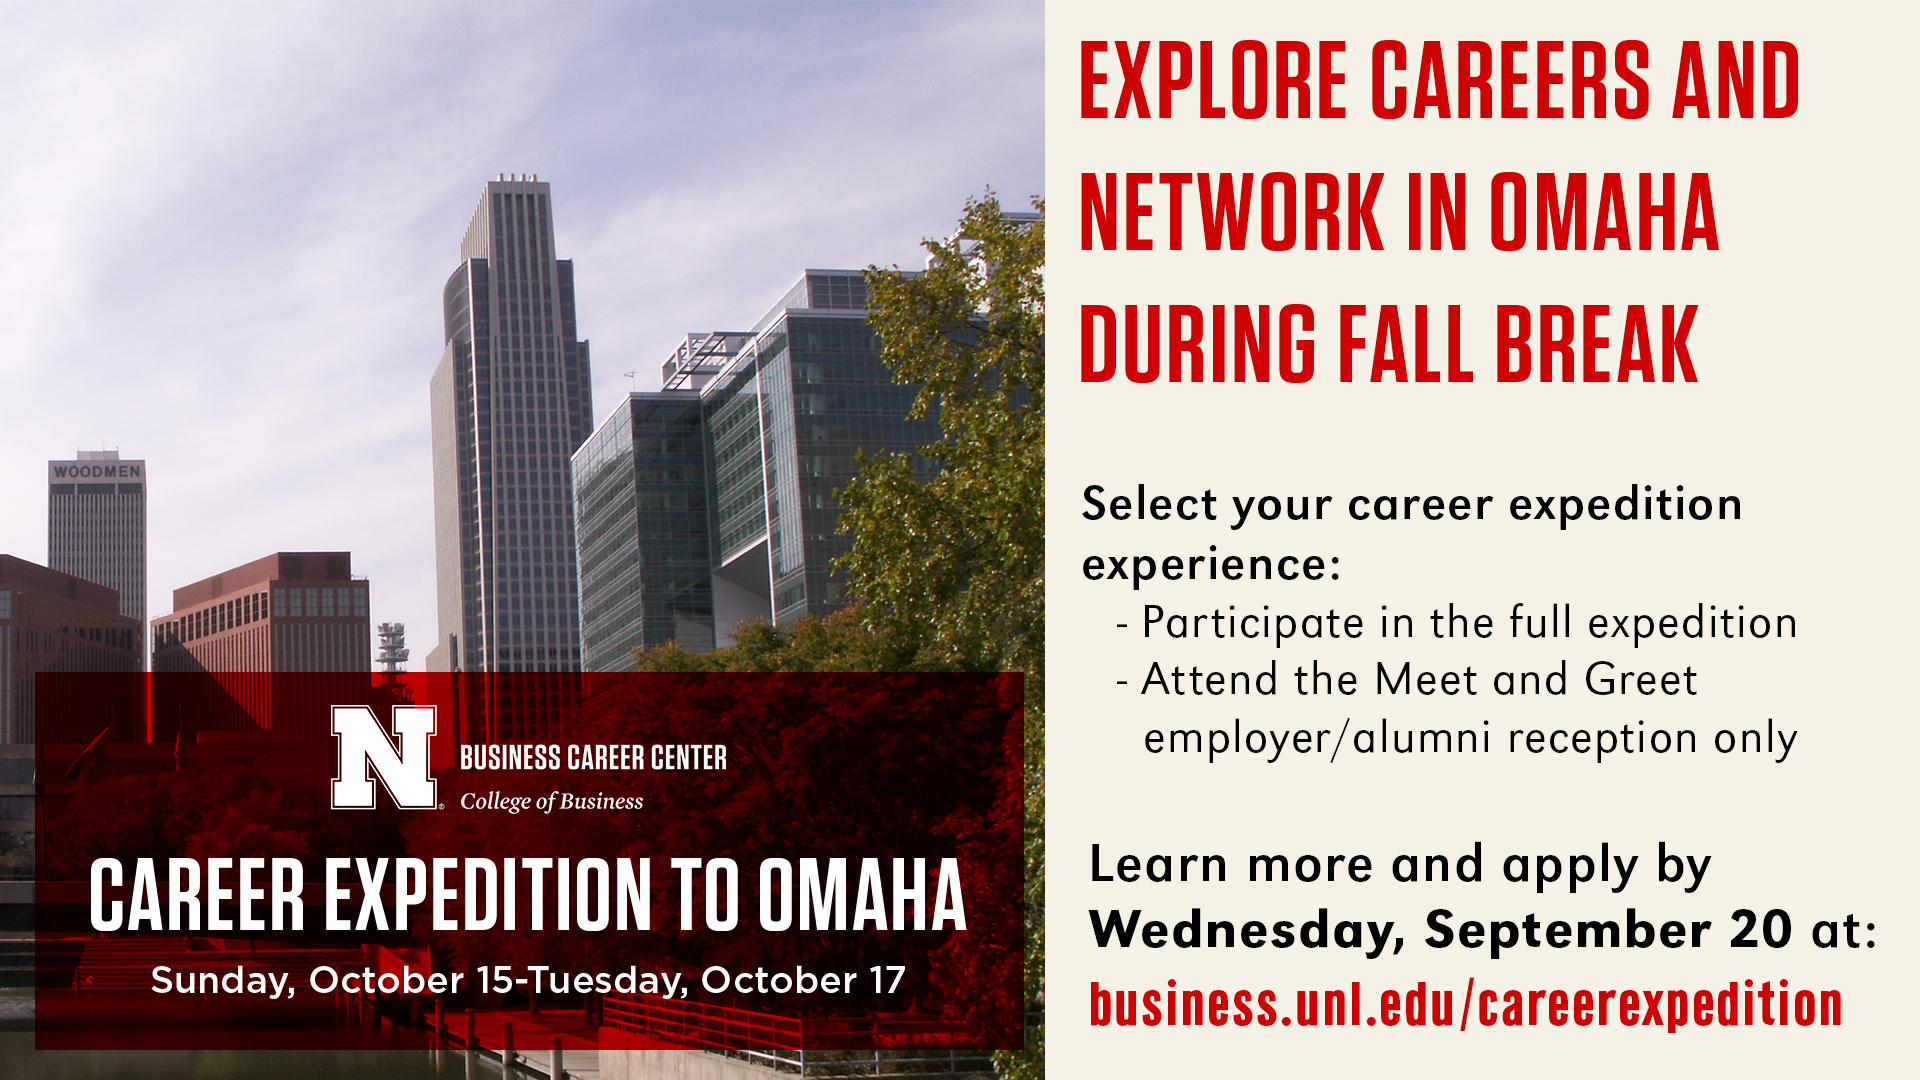 Explore Careers and Network in Omaha